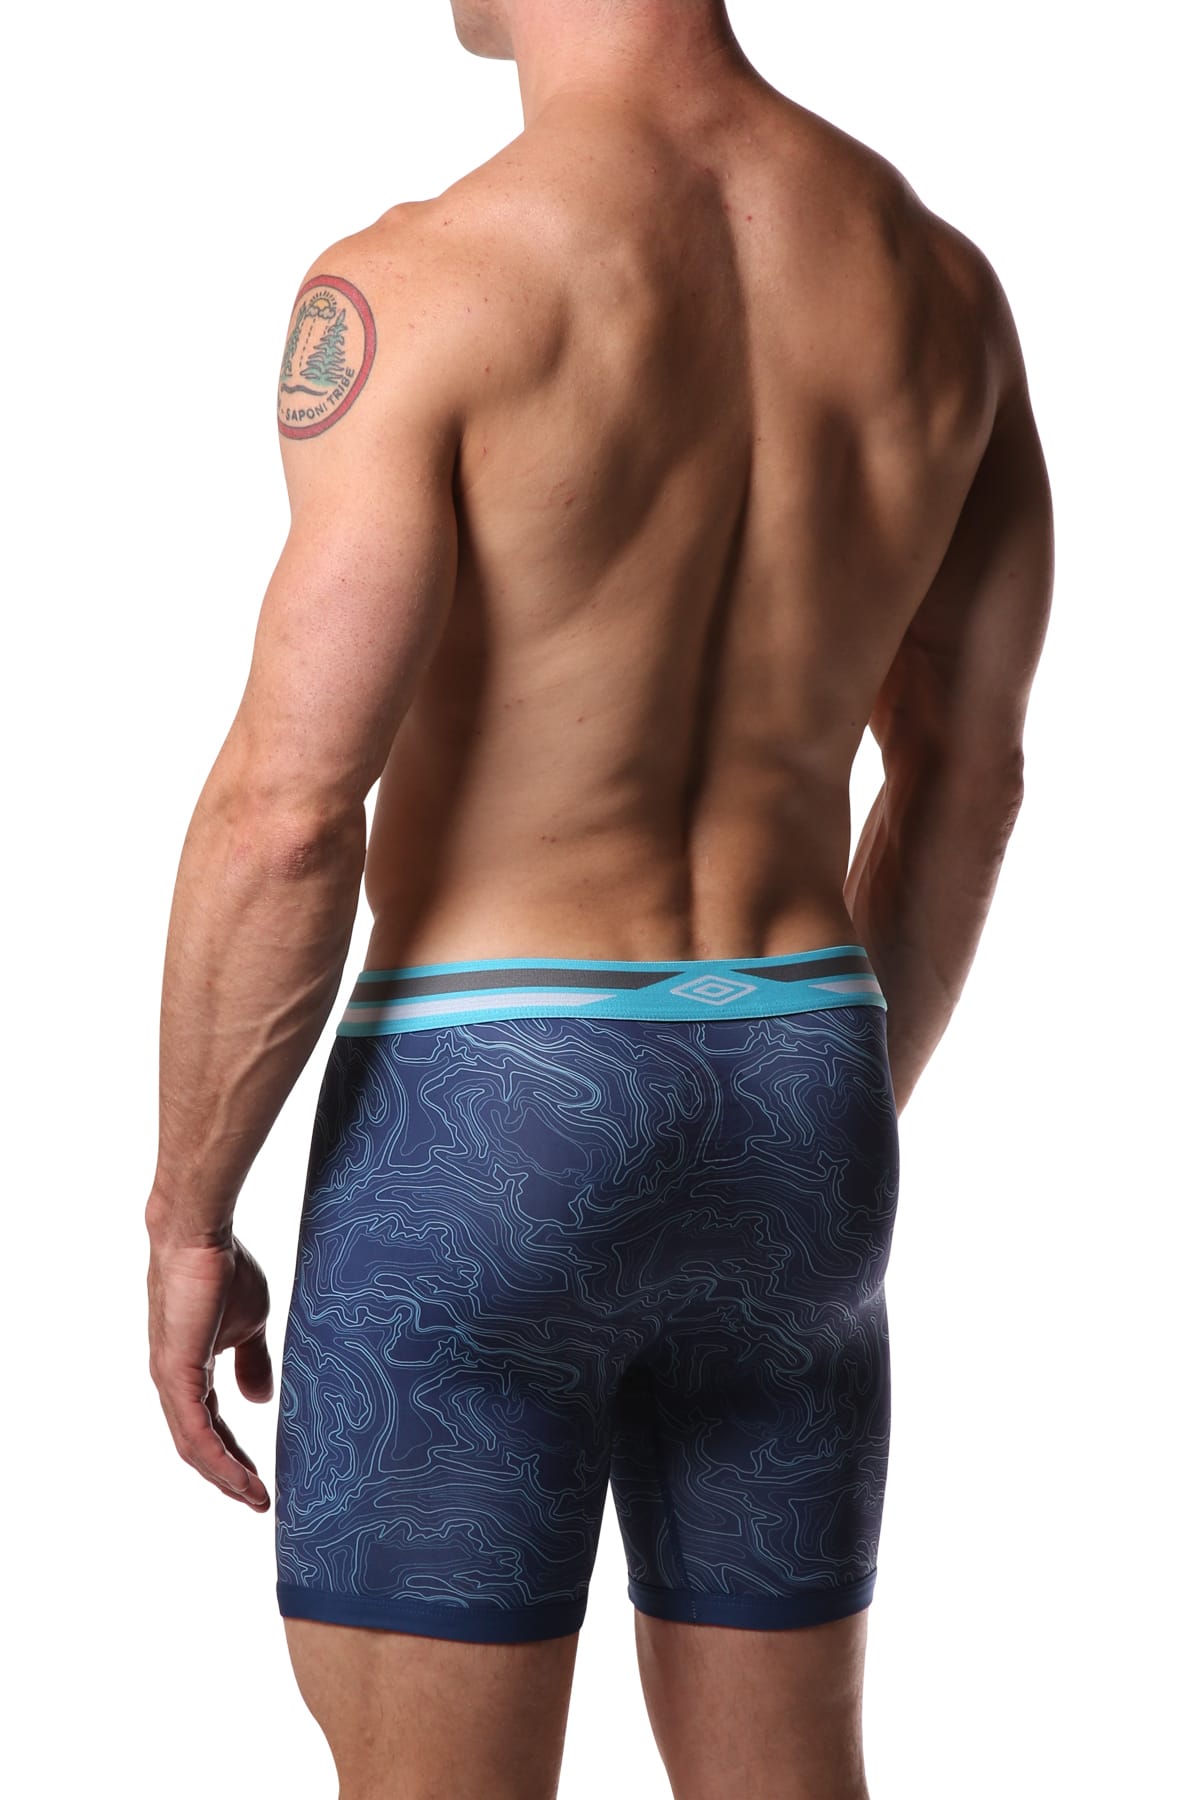 Umbro Blue Water Performance Boxer Brief